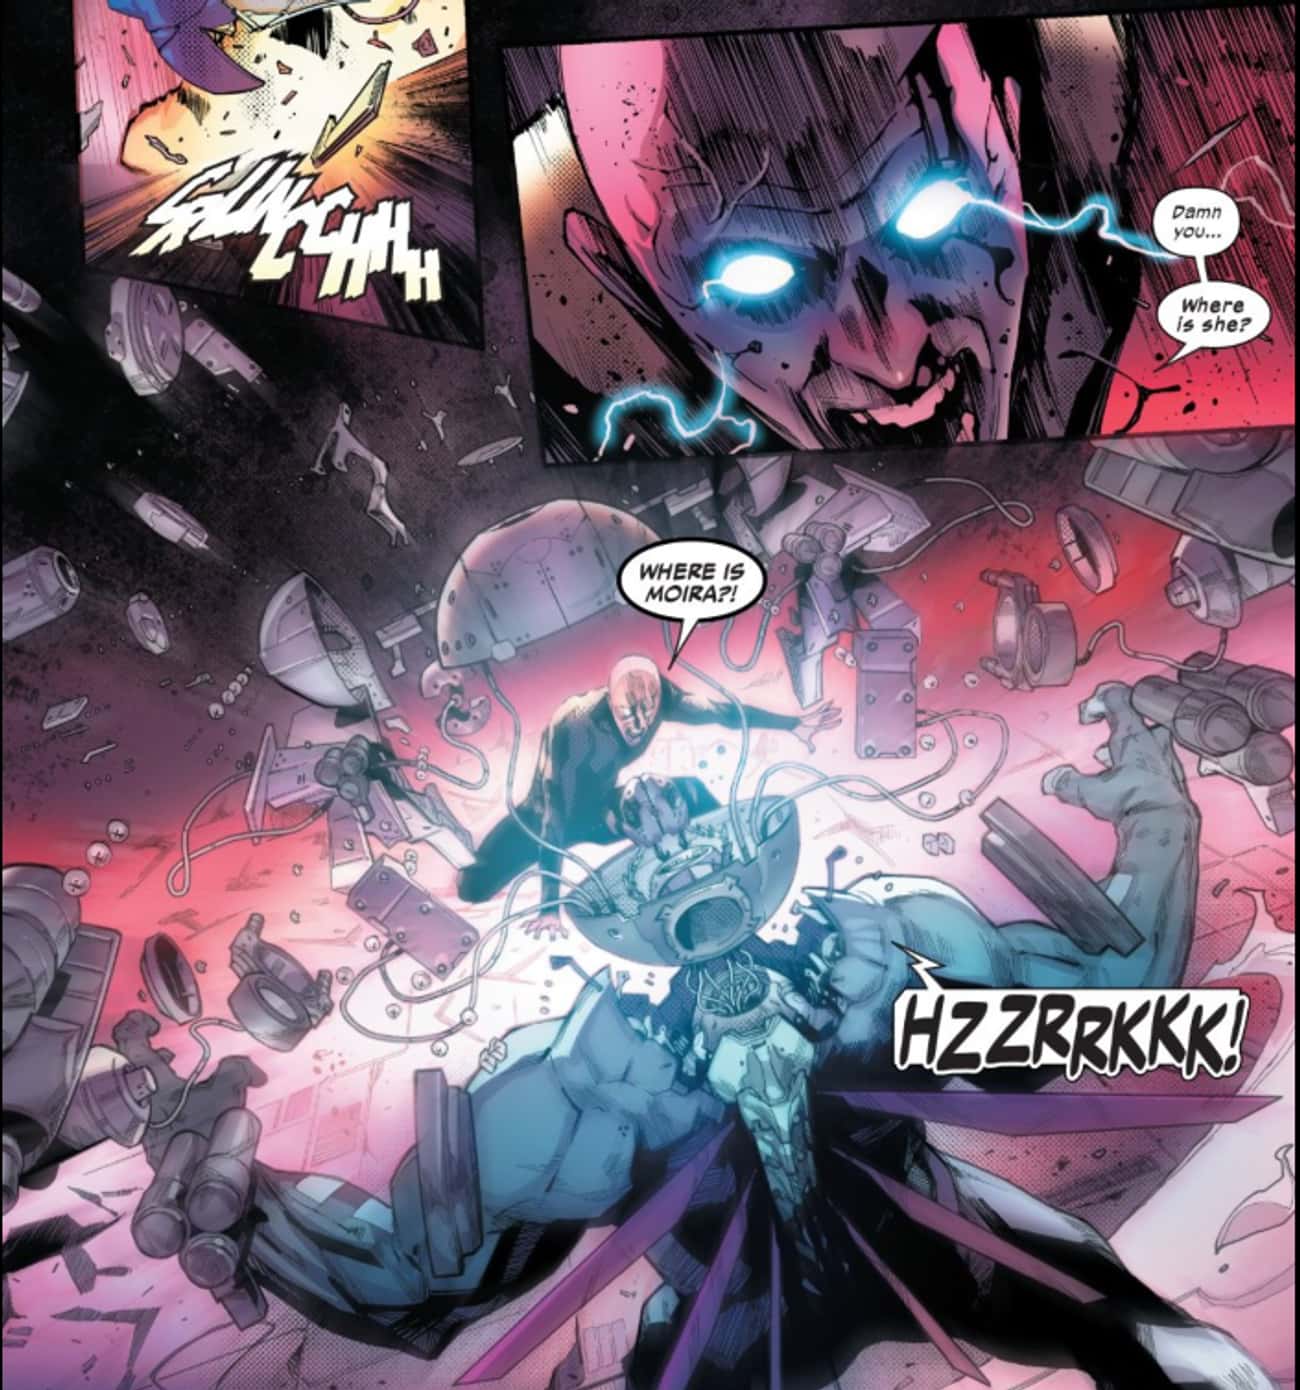 Xavier And Magneto Took On Nimrod In An Epic Brawl - And Lost Big-Time